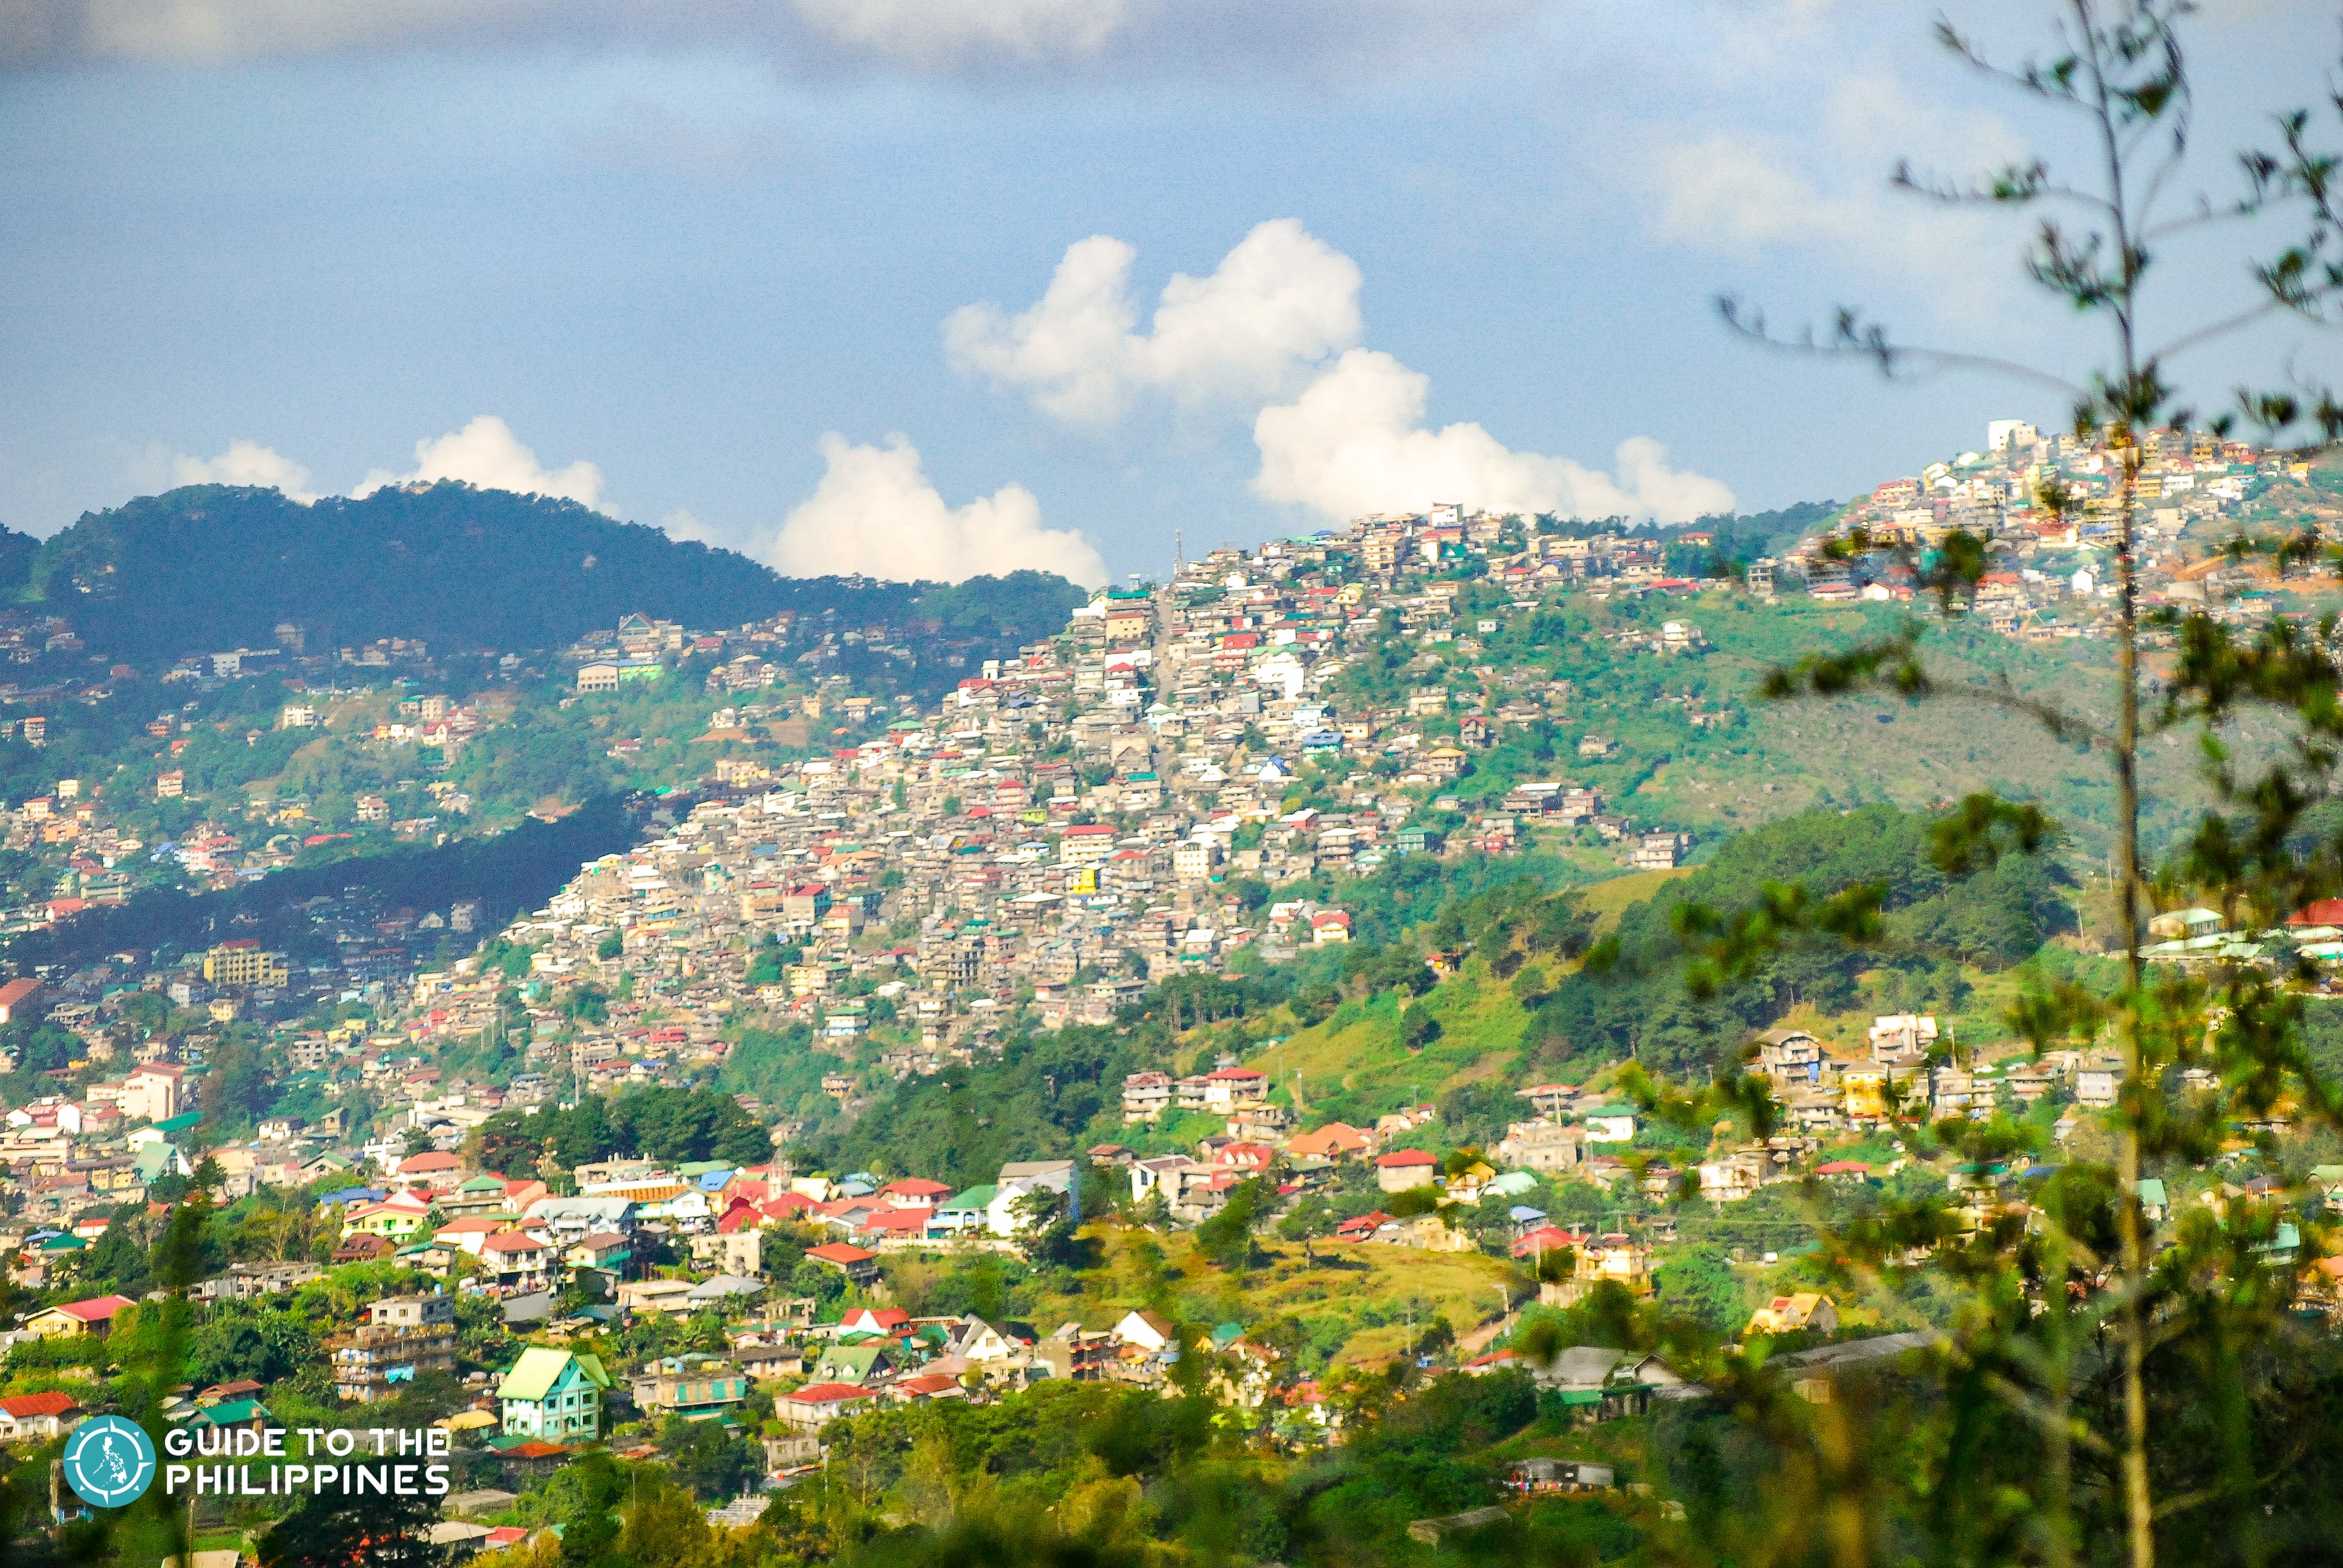 View of Baguio City at Mines View Park